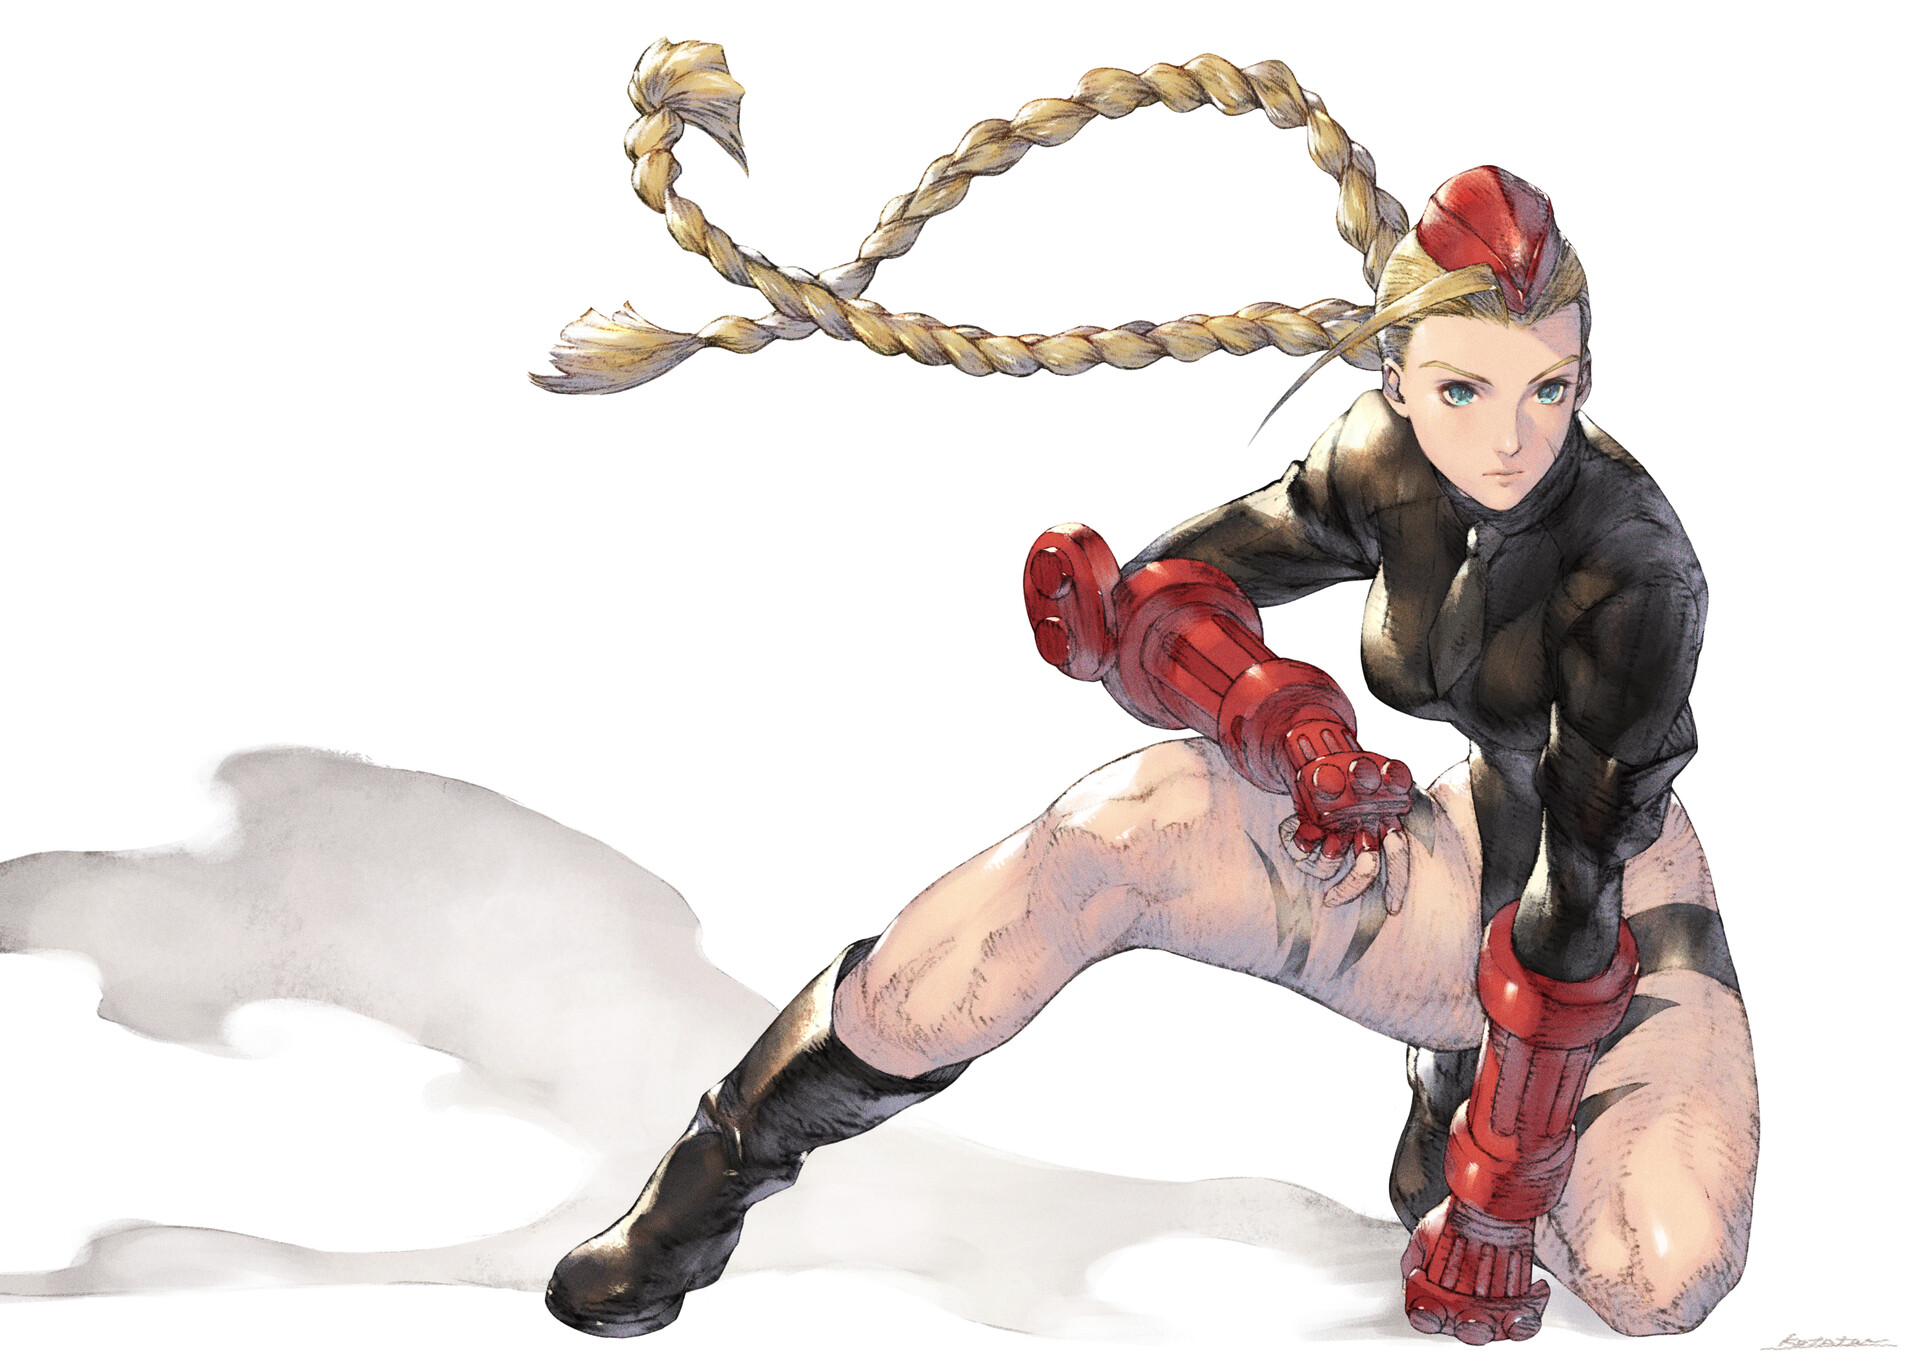 cammy white (street fighter and 1 more) drawn by hershuar